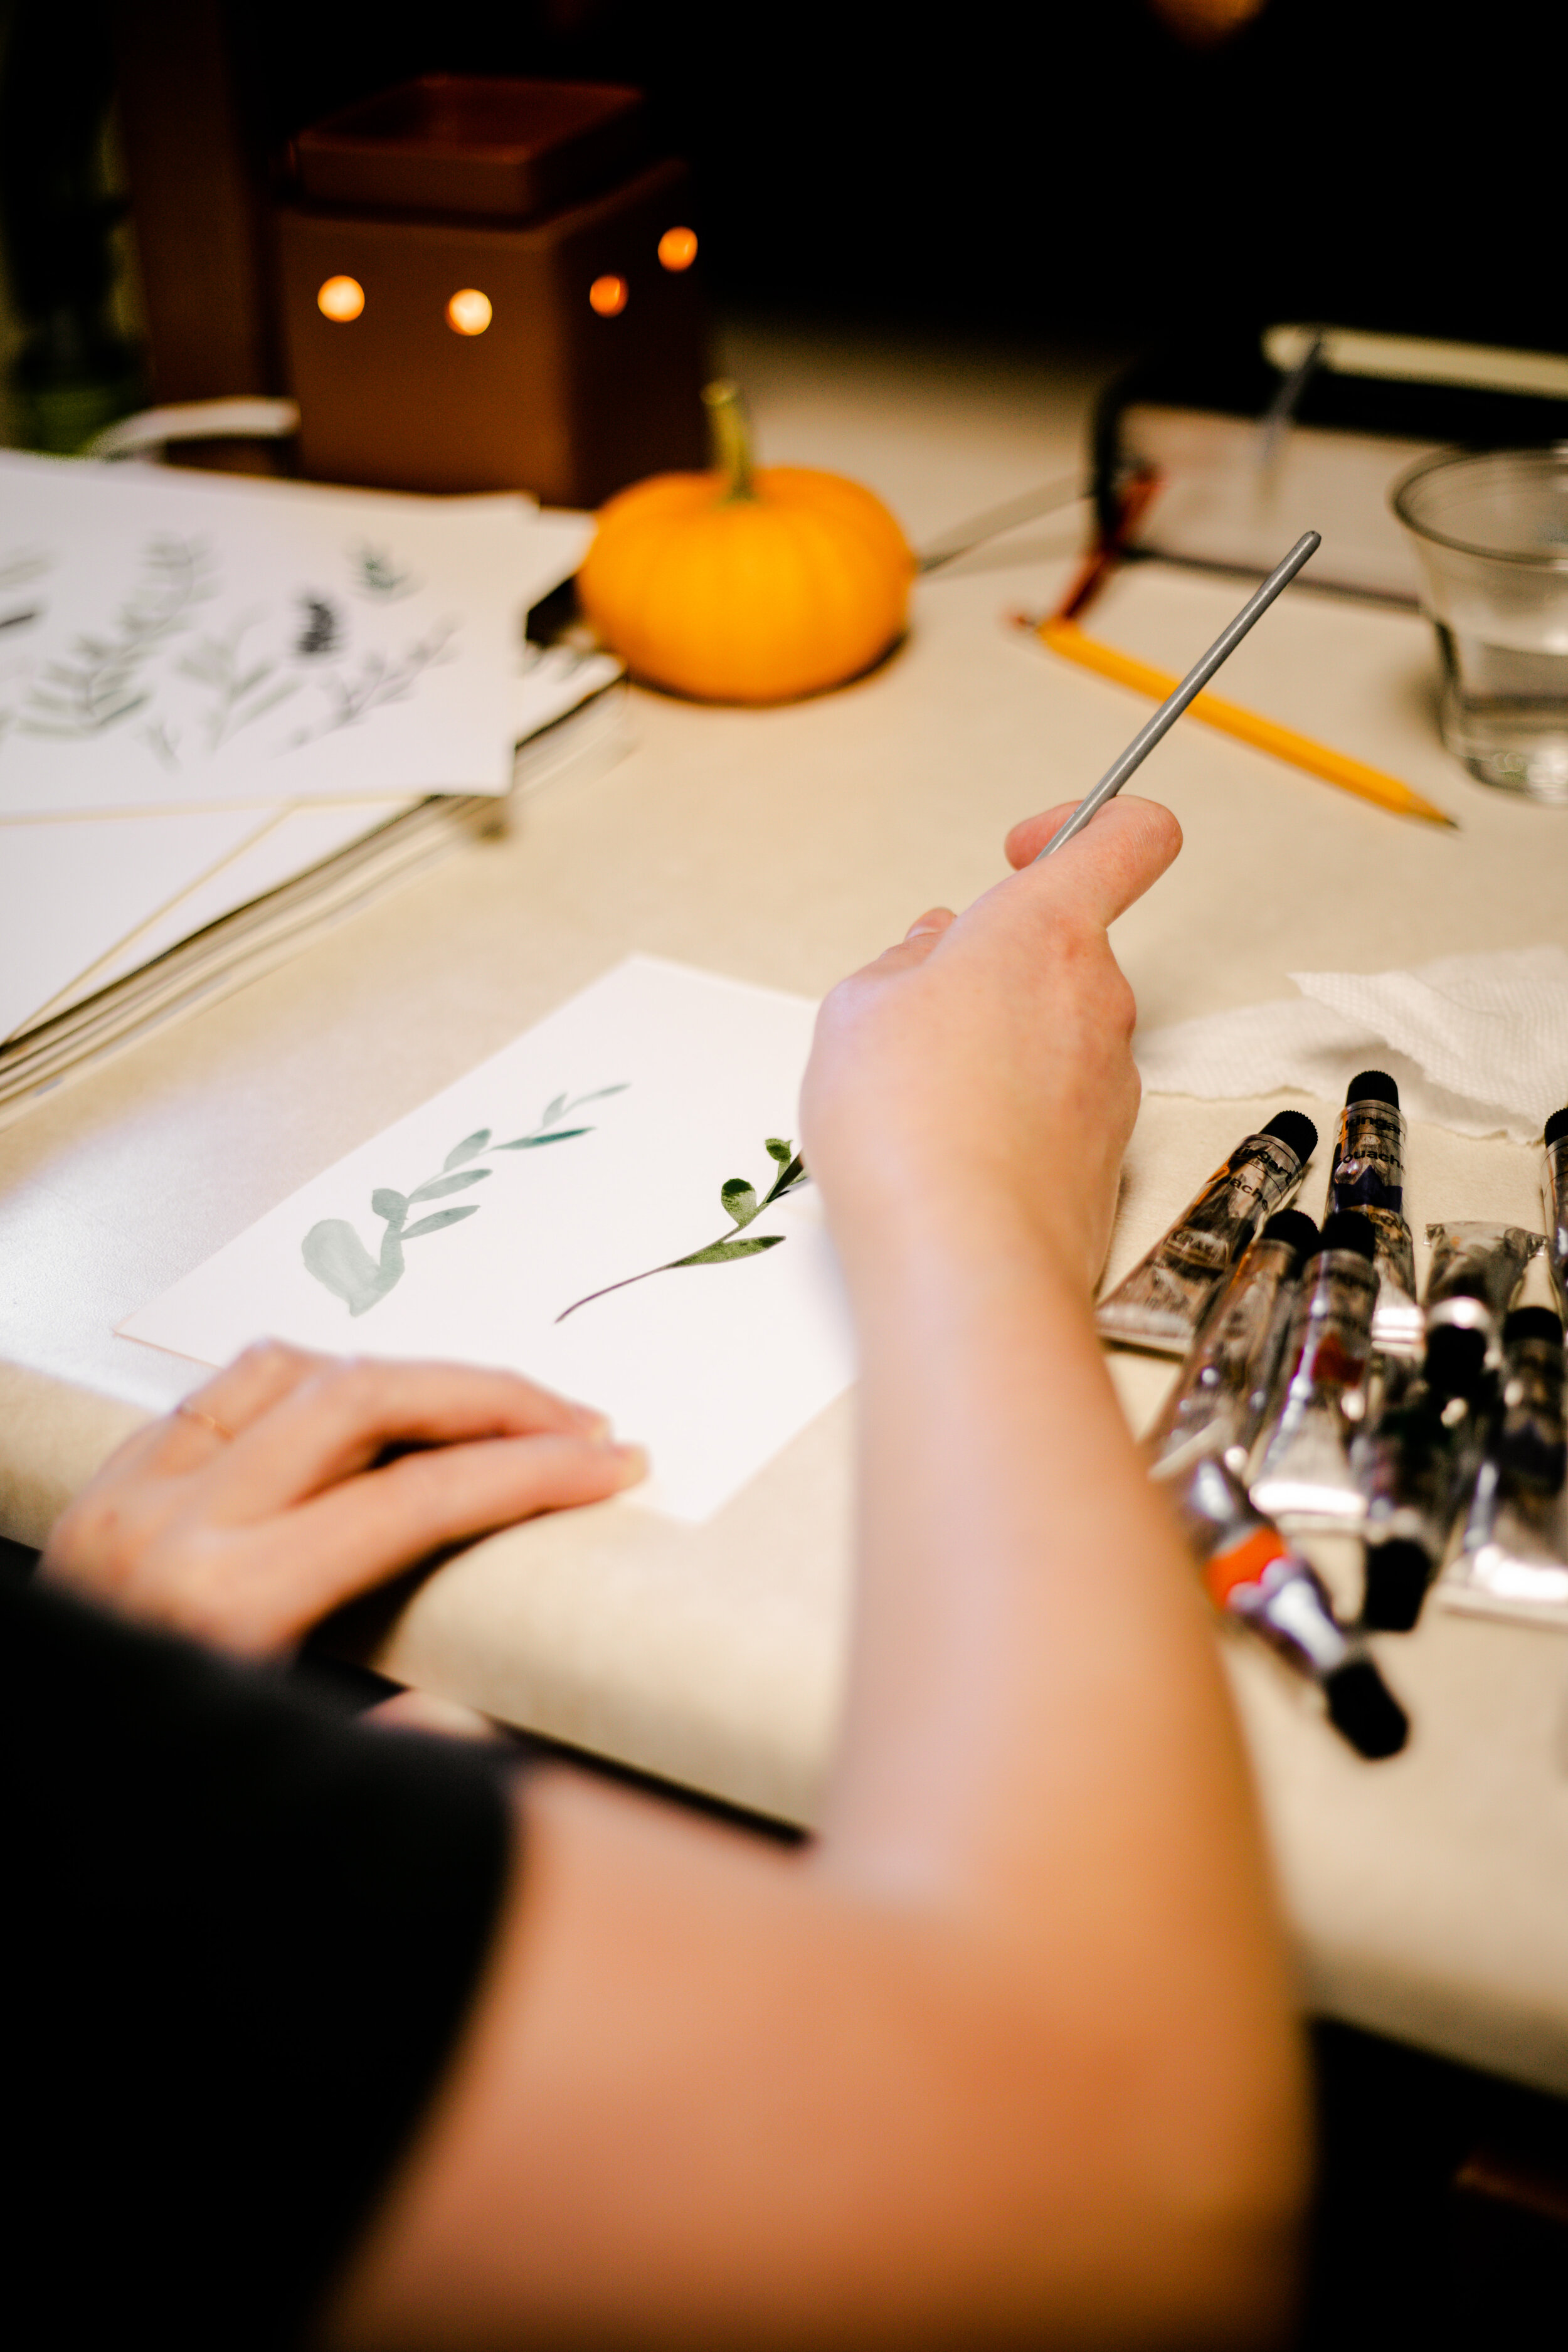 Her specialty is hand painting colorful strokes of various forms of greenery and plants.